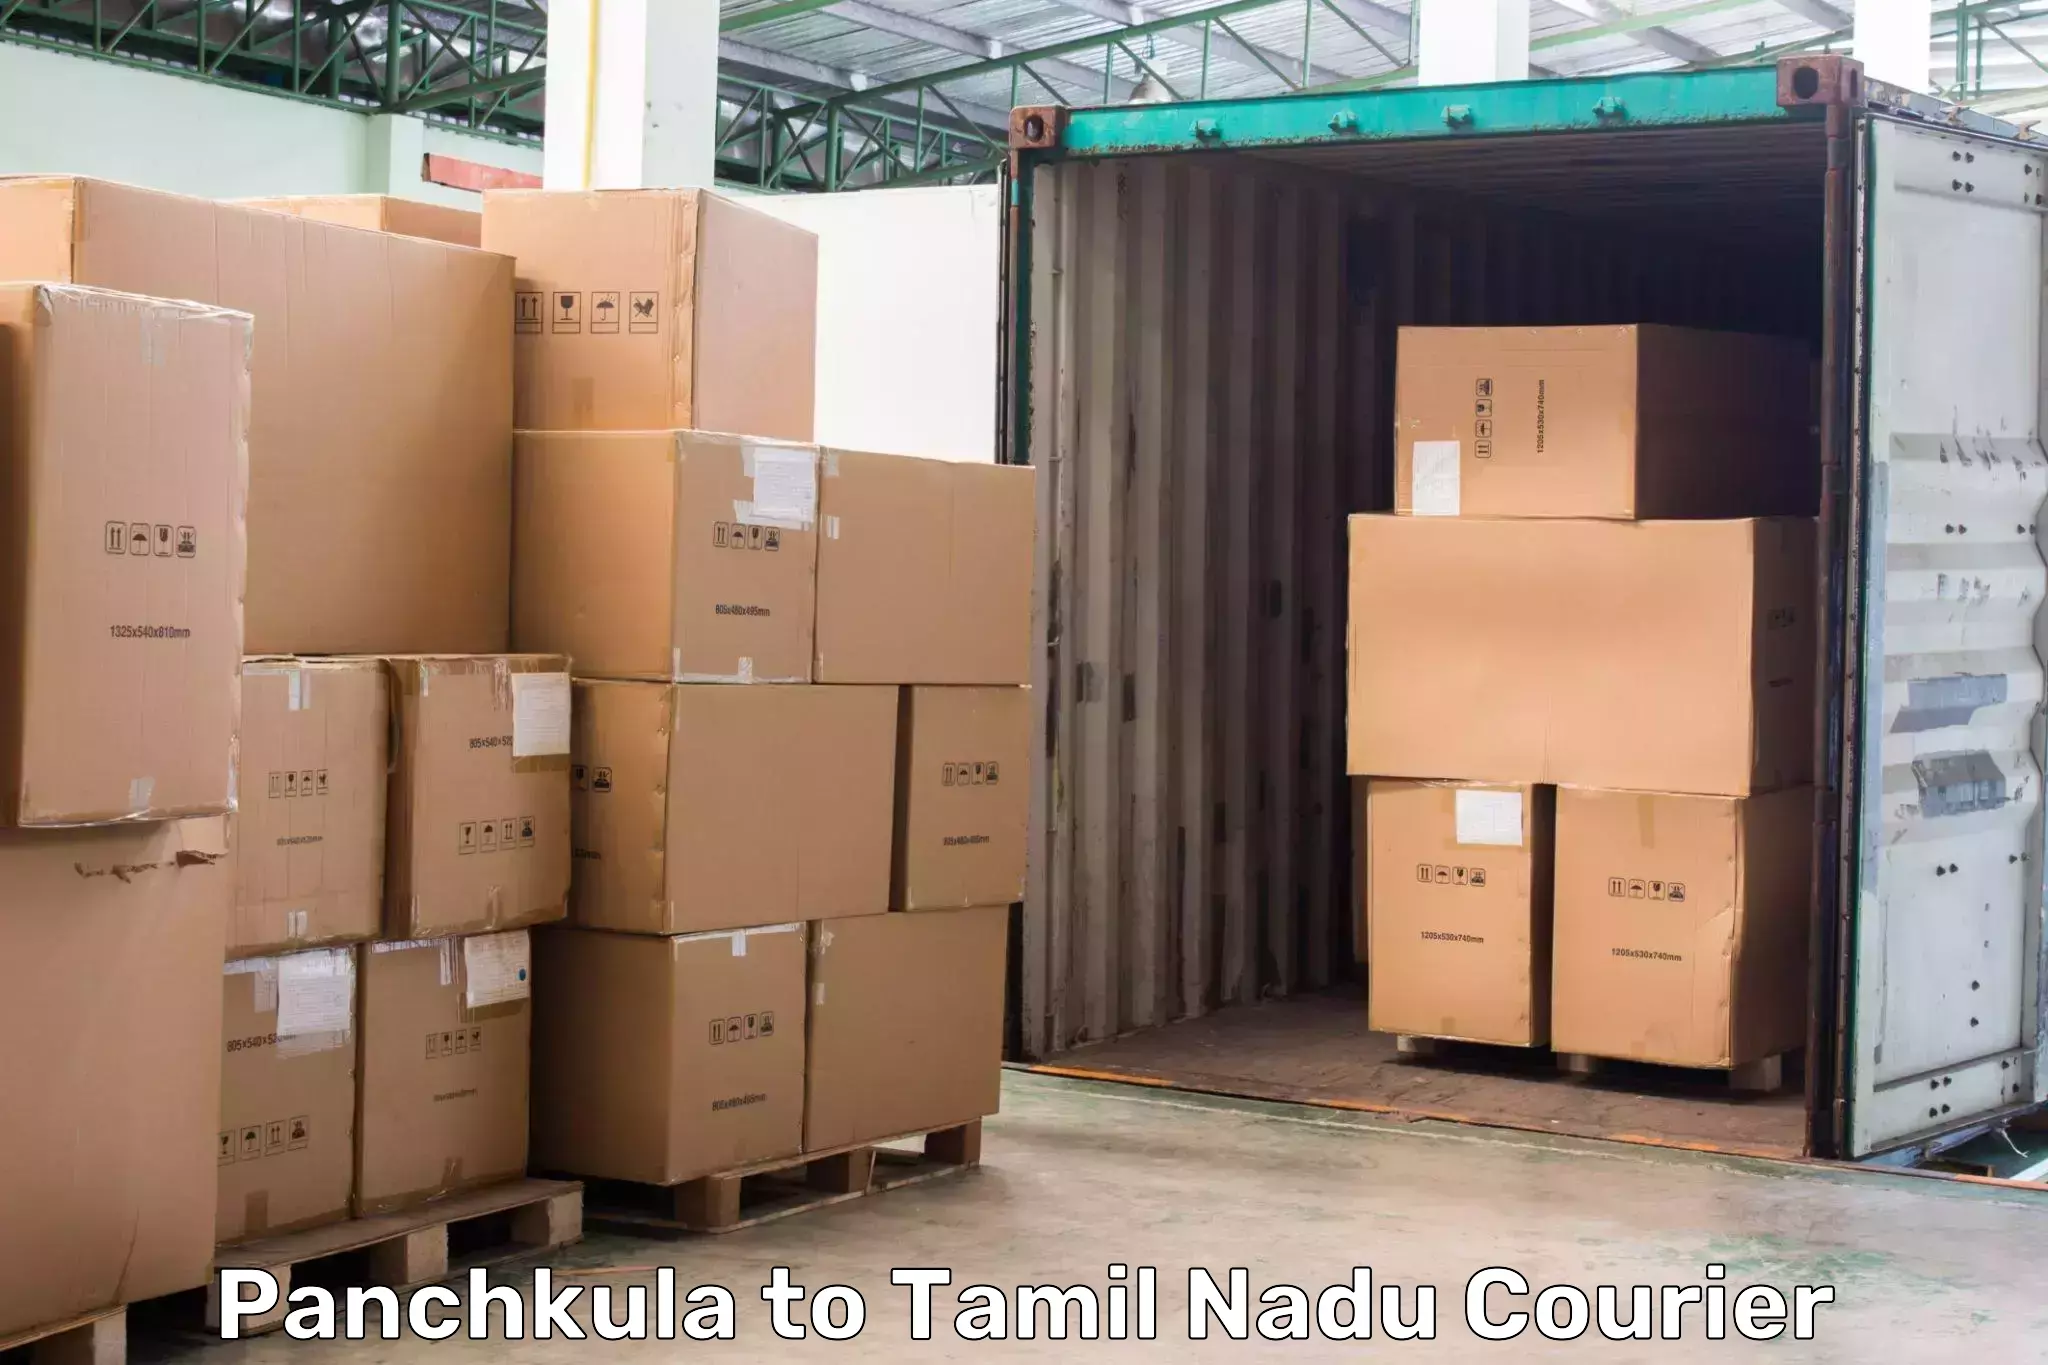 Courier service efficiency Panchkula to Ennore Port Chennai